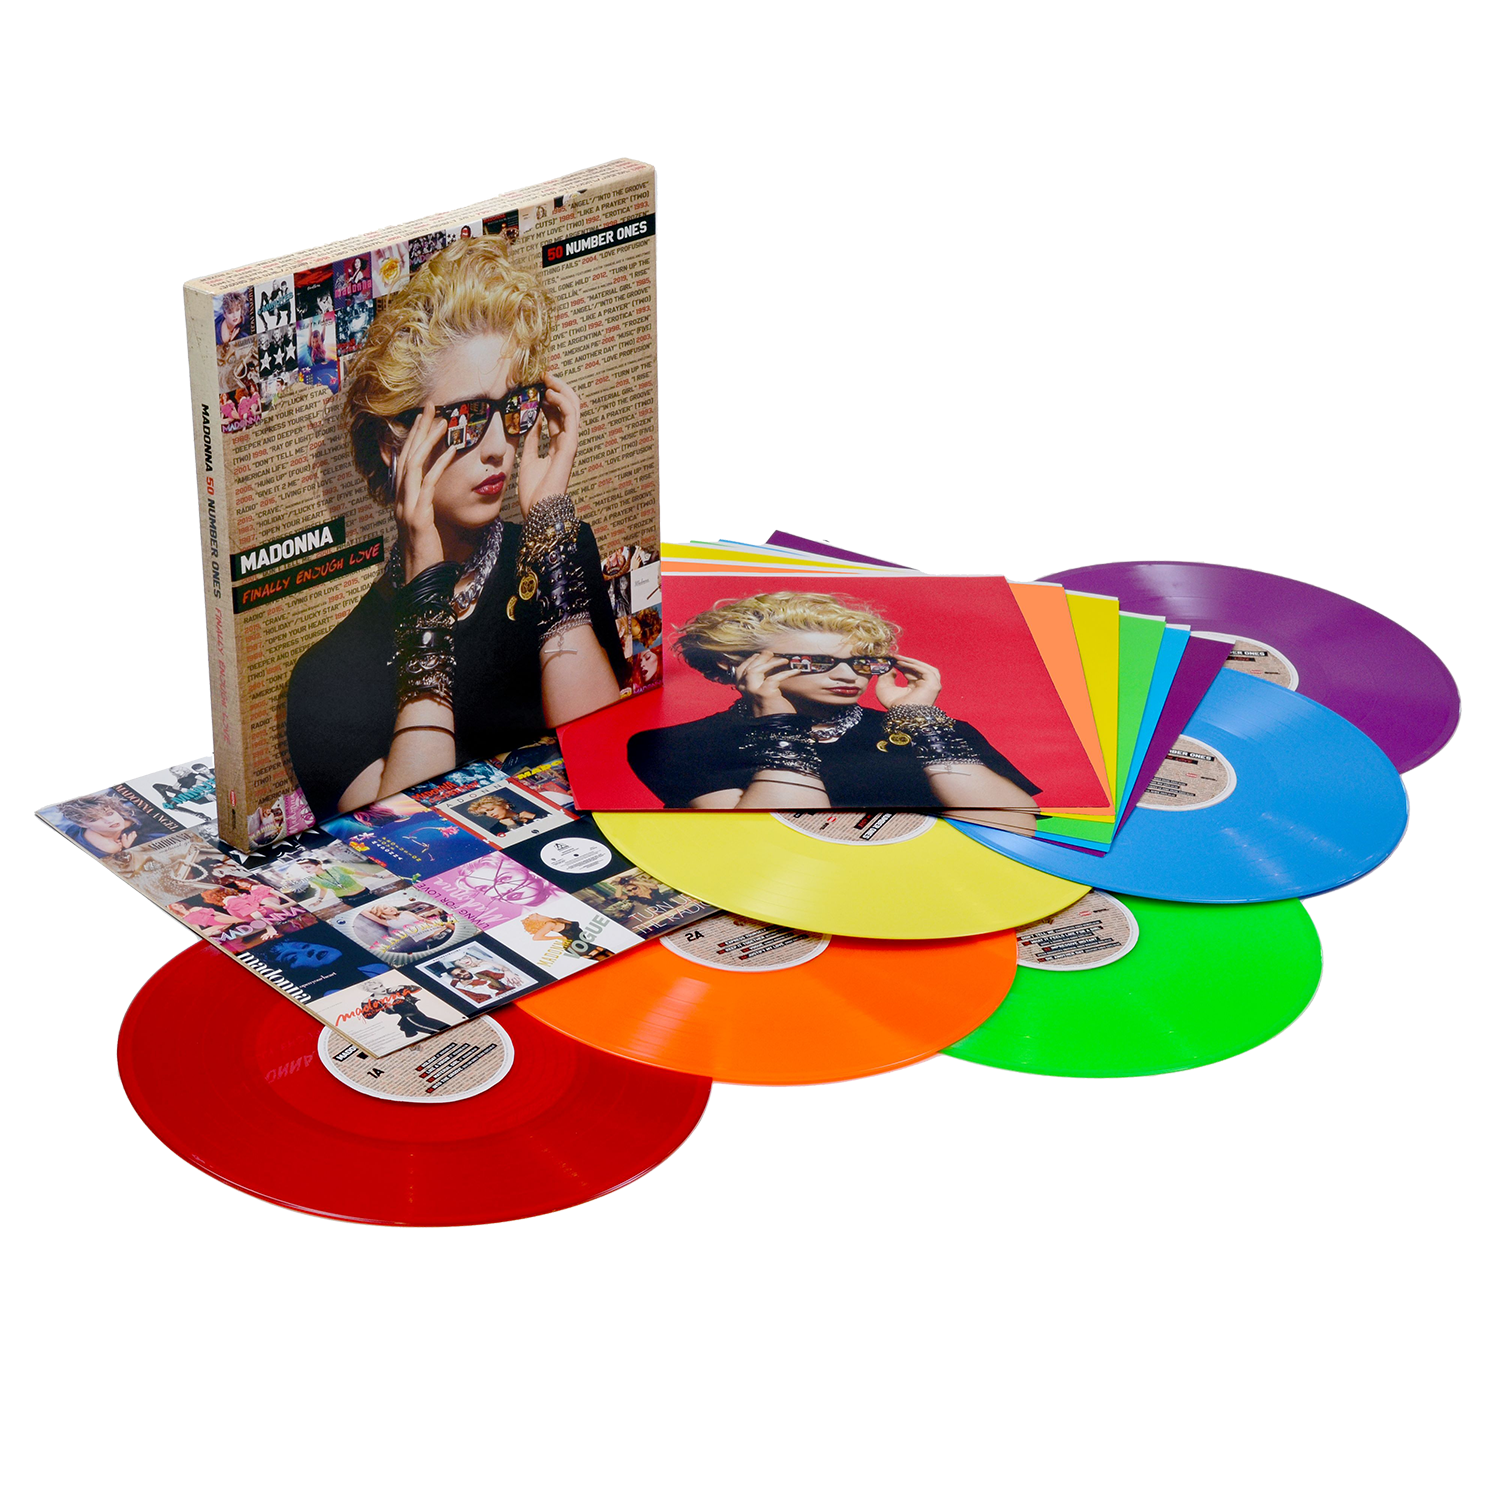 Number　Madonna　Limited　Love　Ones:　Sound　6LP　Enough　of　Box　Set　Edition　Madonna　Vinyl　Rainbow　Finally　Fifty　Vinyl